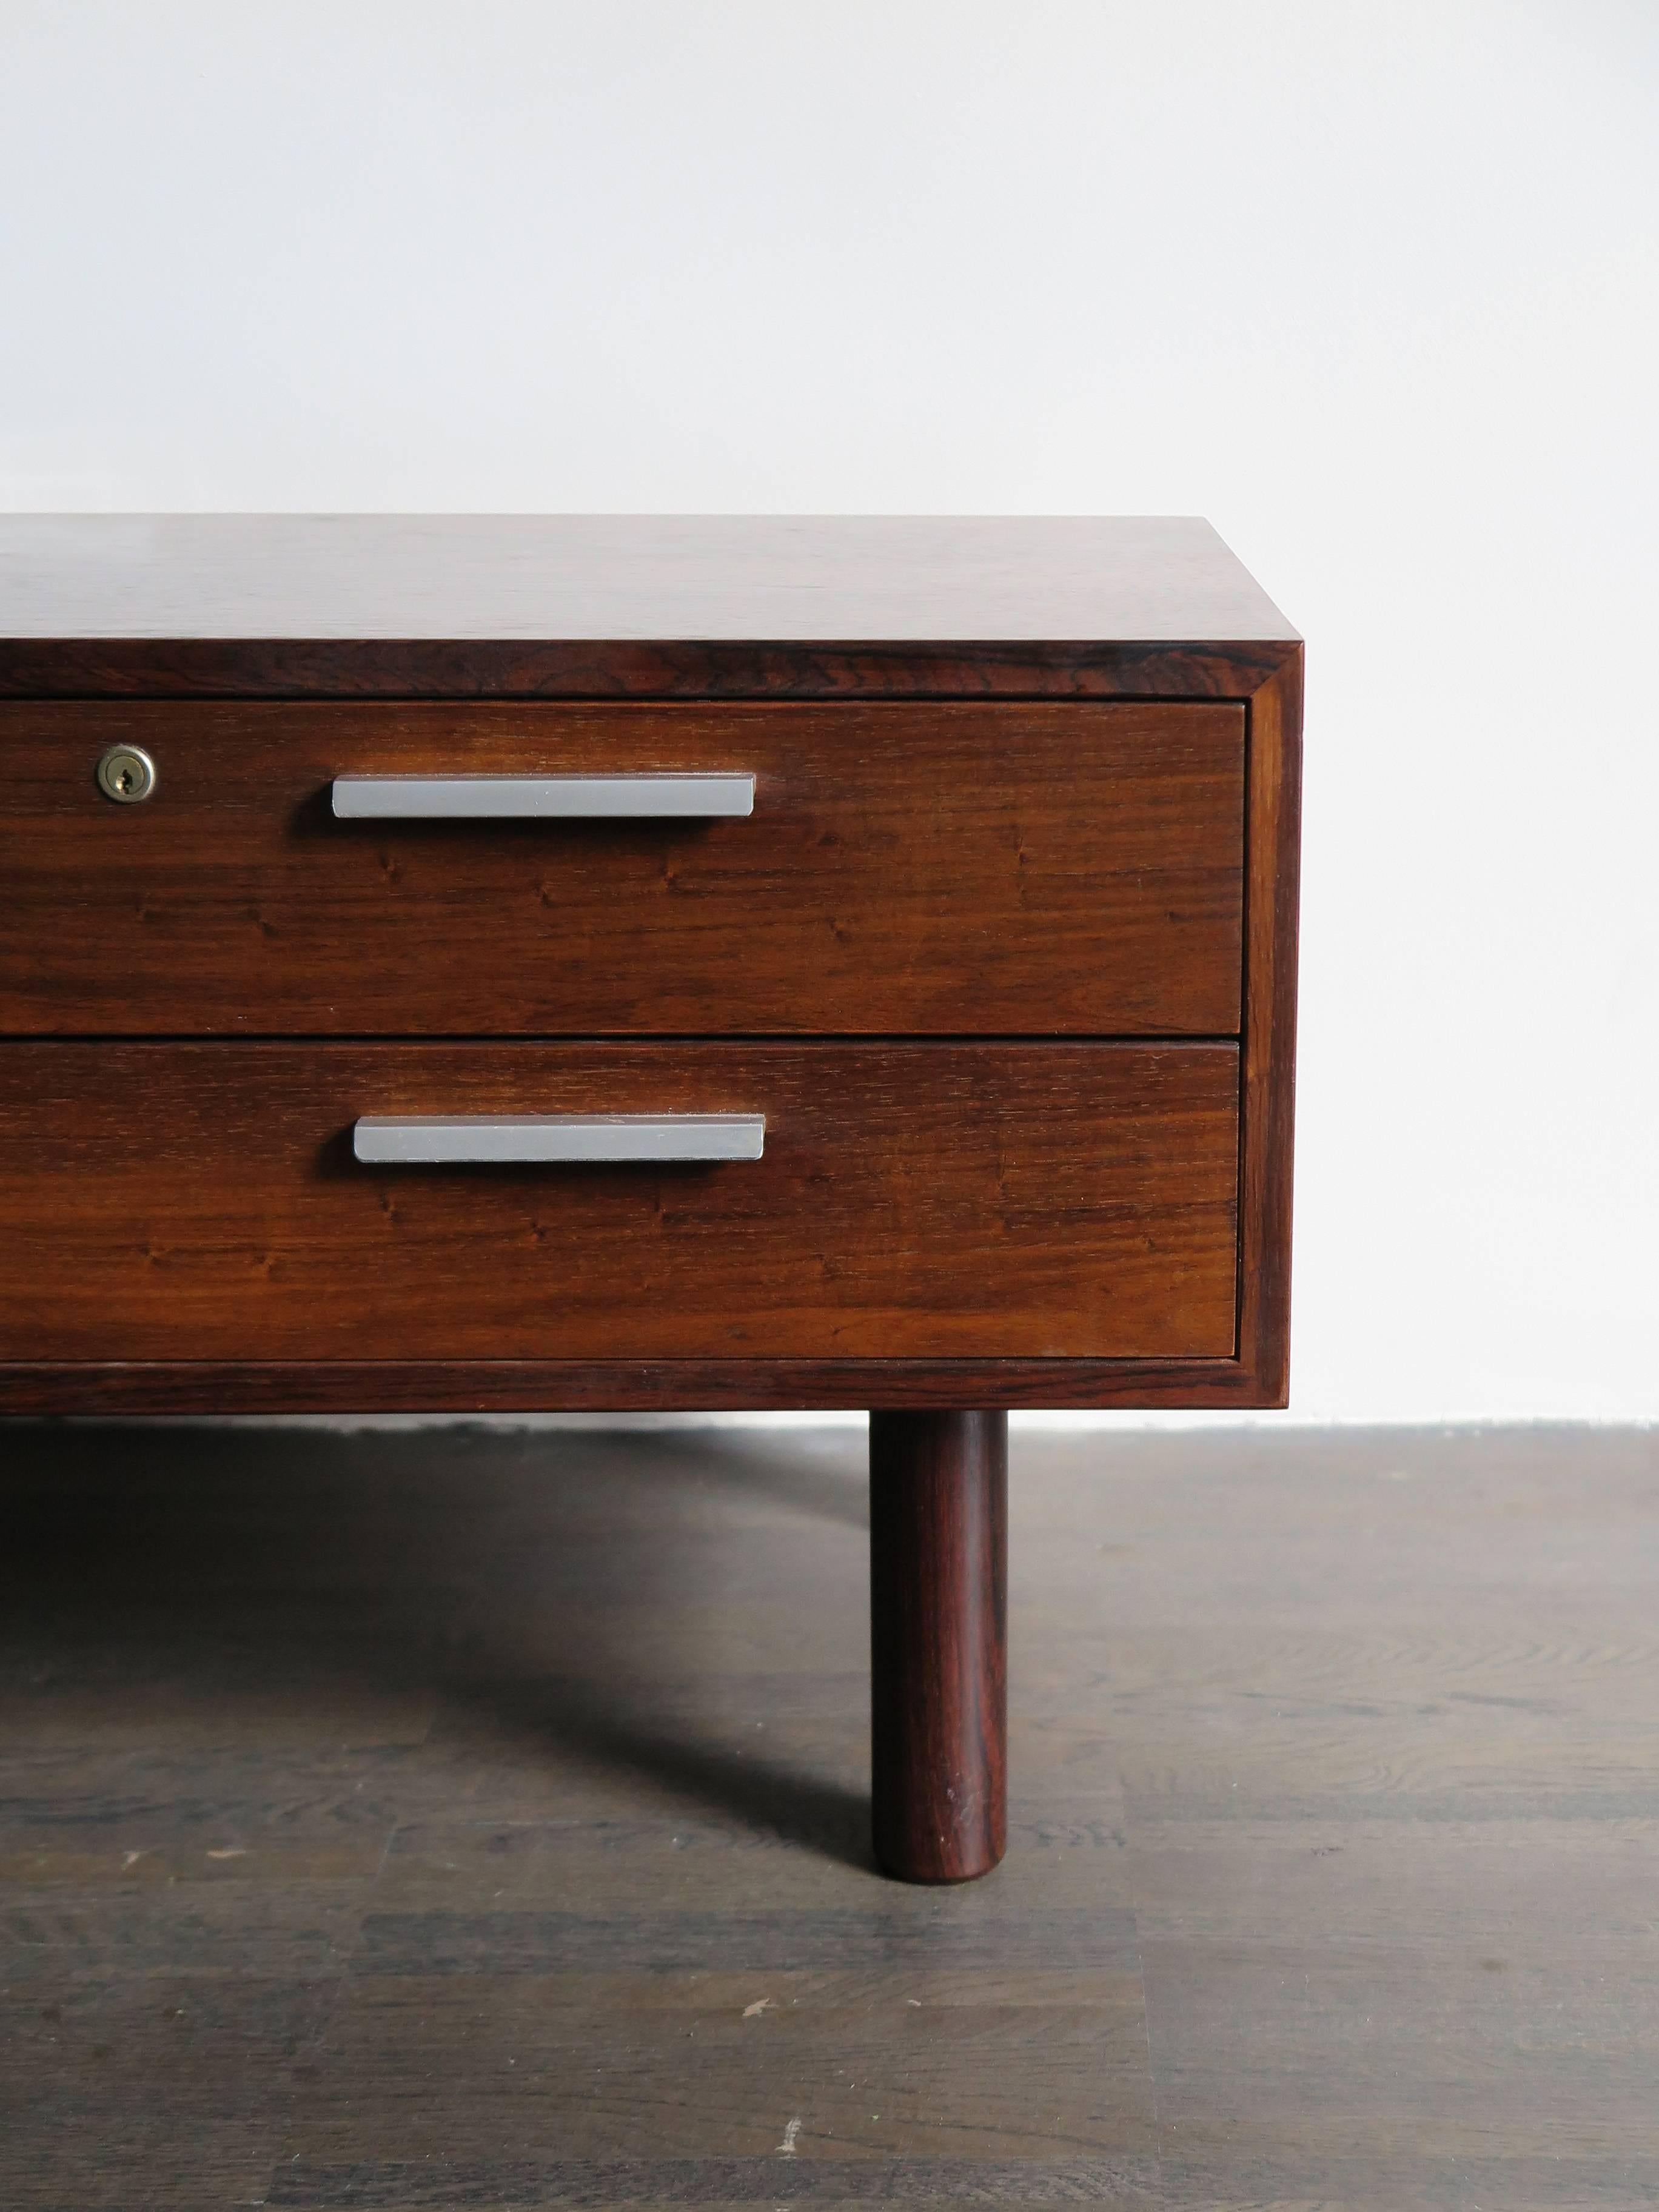 Small midcentury design Danish and Scandinavian chest of drawers or nightstand, in rosewood with aluminium handles, keys are not available, midcentury design, circa 1960s.
Some signs due to normal use over time.